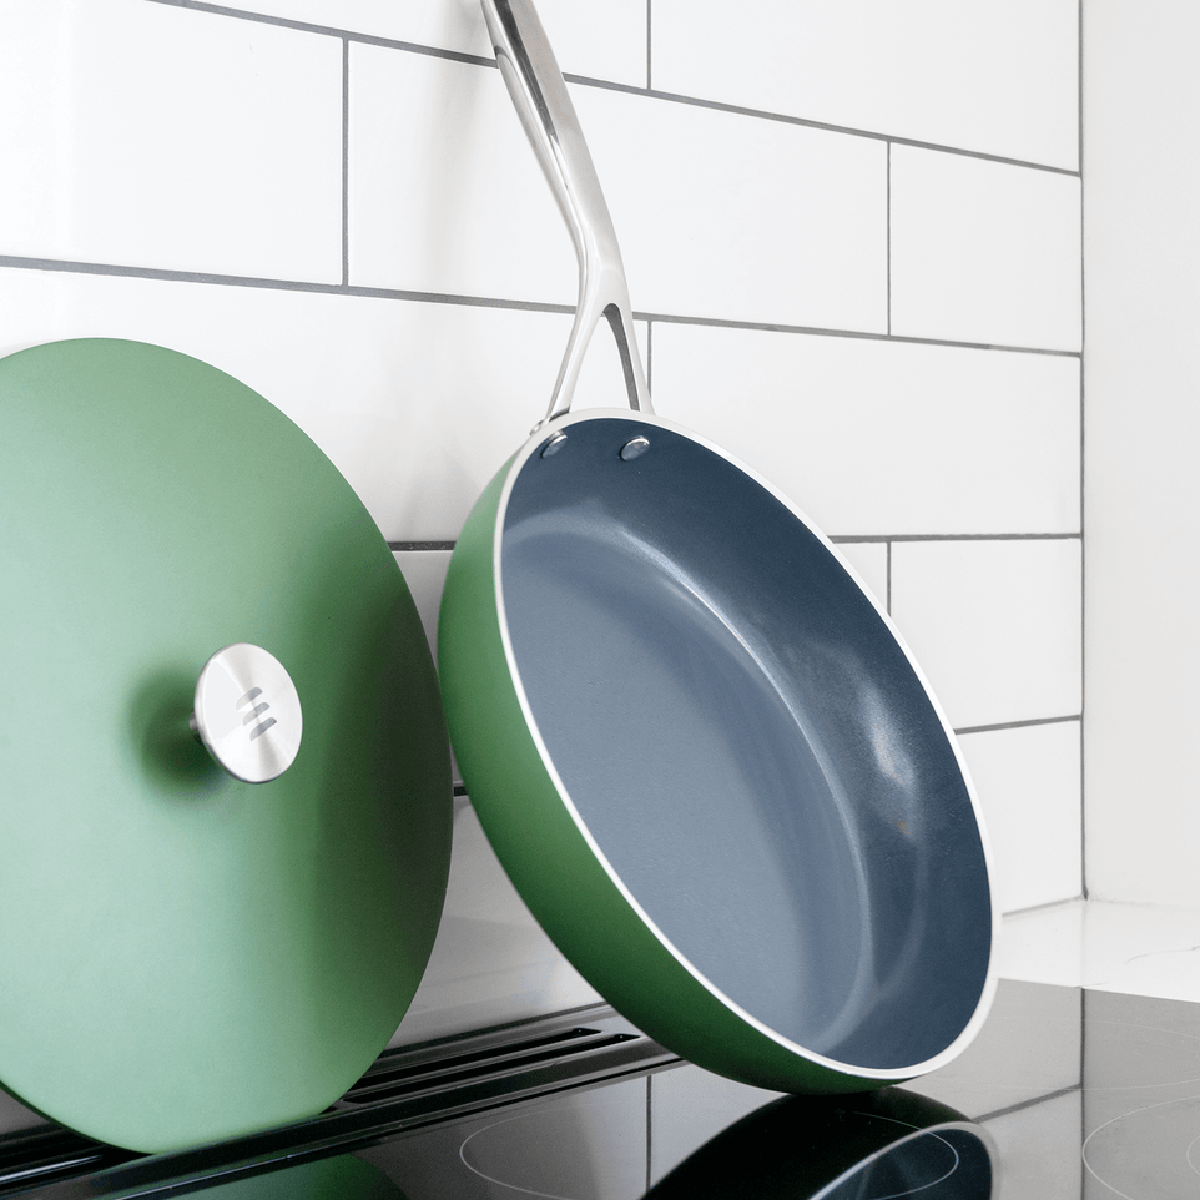 Meet The Cookware That's Almost Too Pretty to Use. (Almost). - The